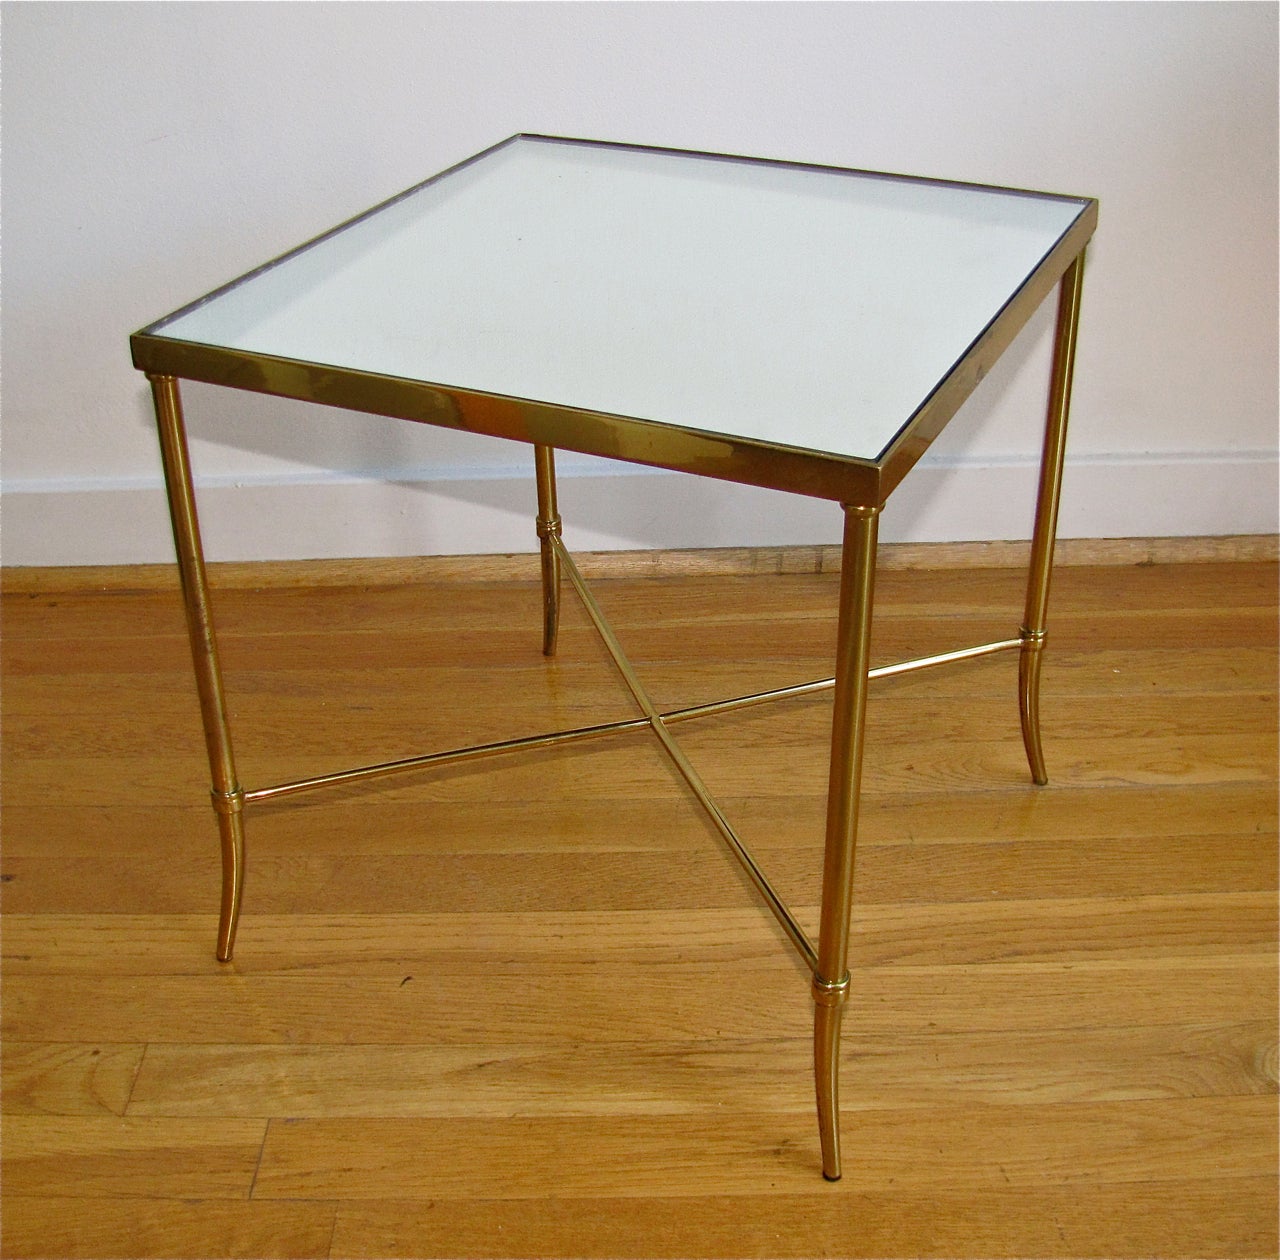 Smaller scale brass side table with x-base stretcher and antique mirror inset top.